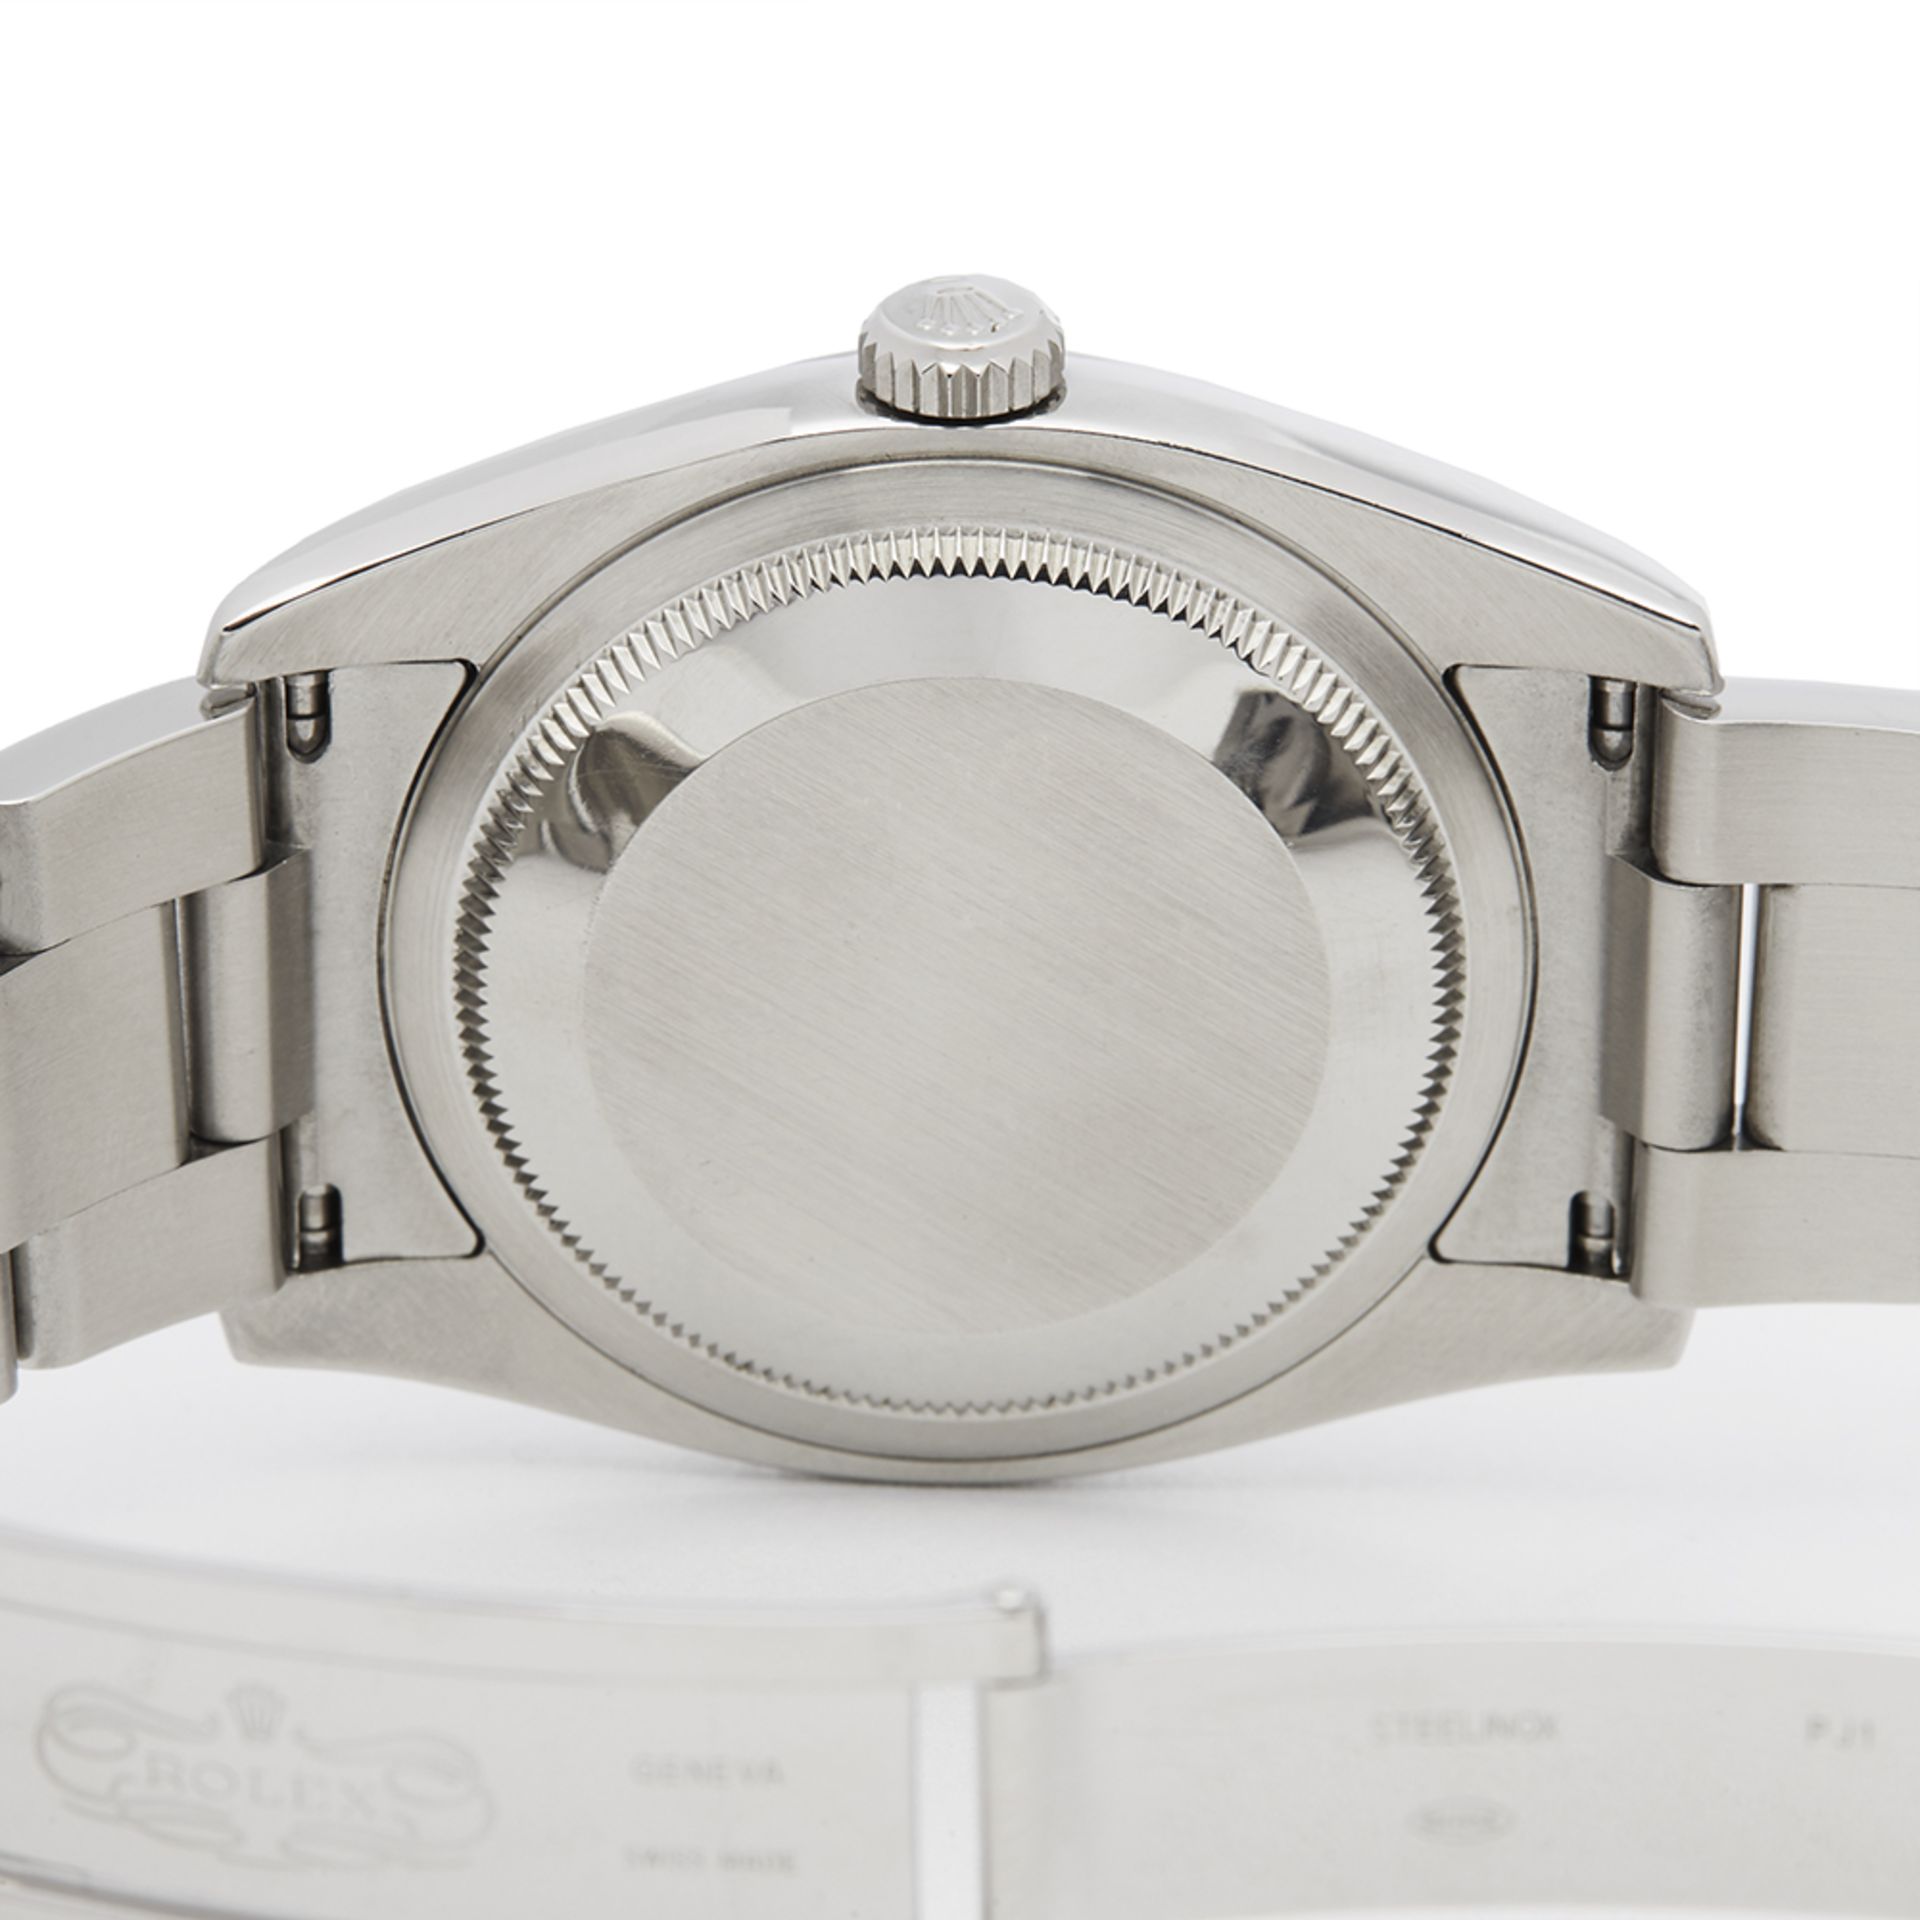 2008 Rolex DateJust 36 Stainless Steel - 116200 - Image 3 of 7